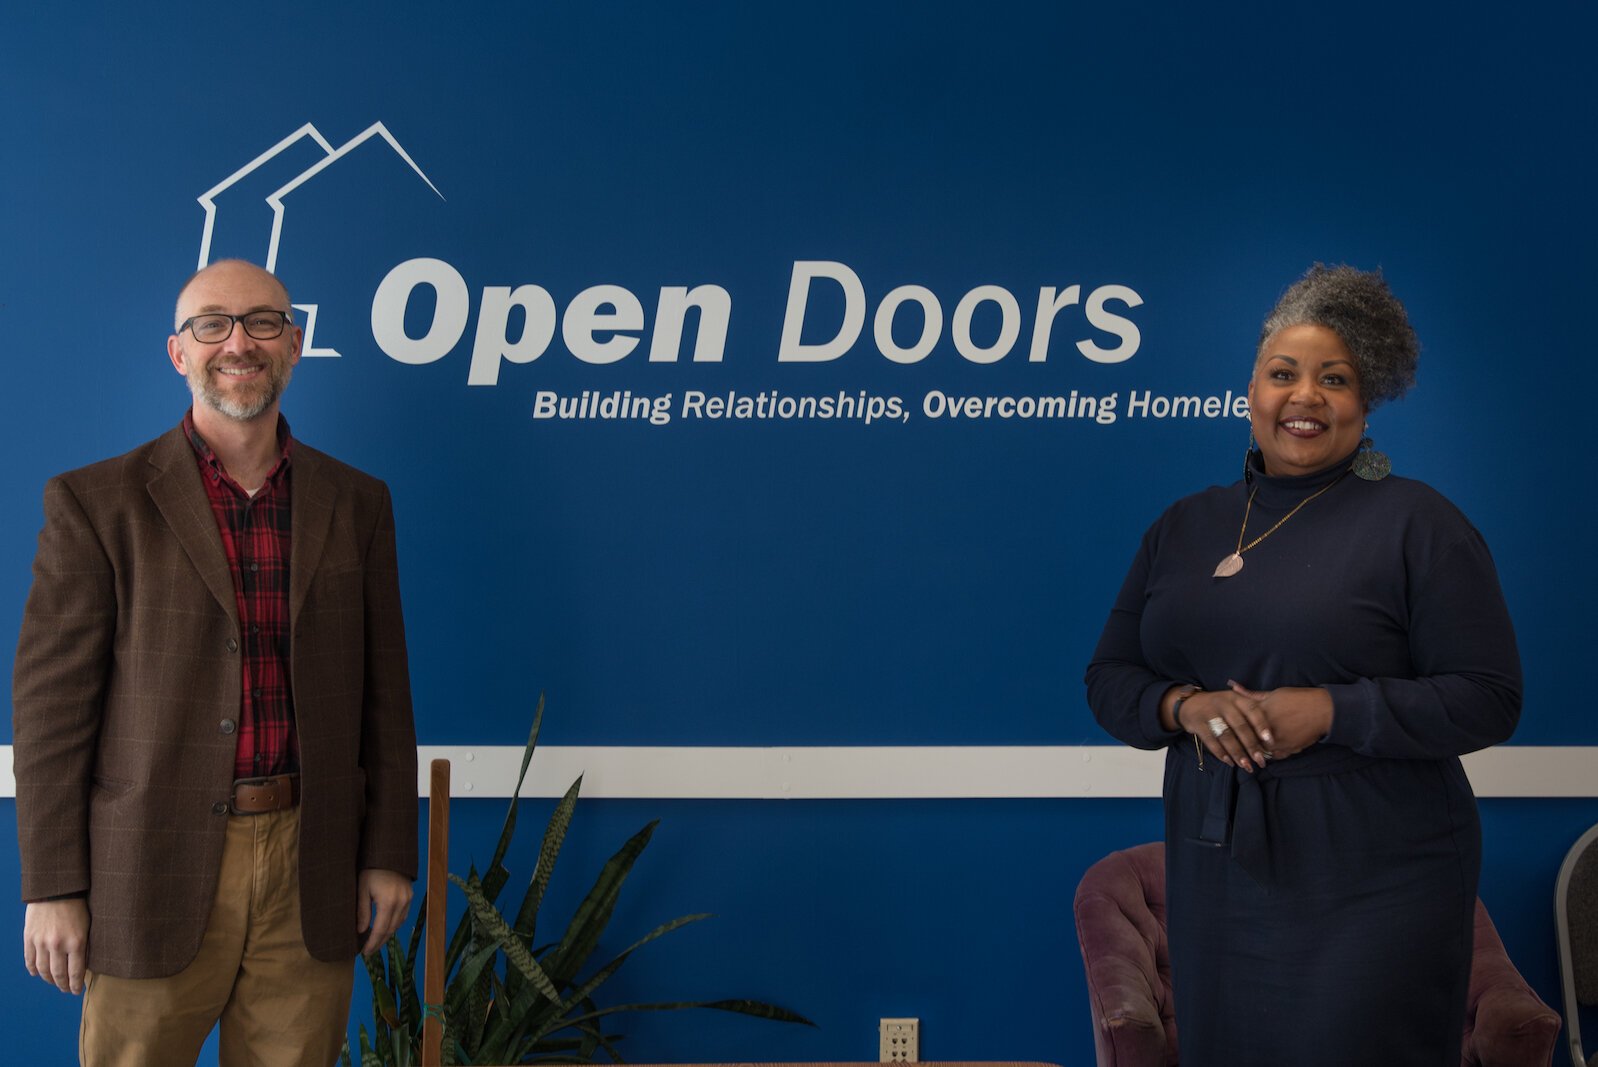 Matt Lager and Stephanie Hoffman and their respective organizations are collaborating to make homeownership a reality for people who have recently experienced homelessness.